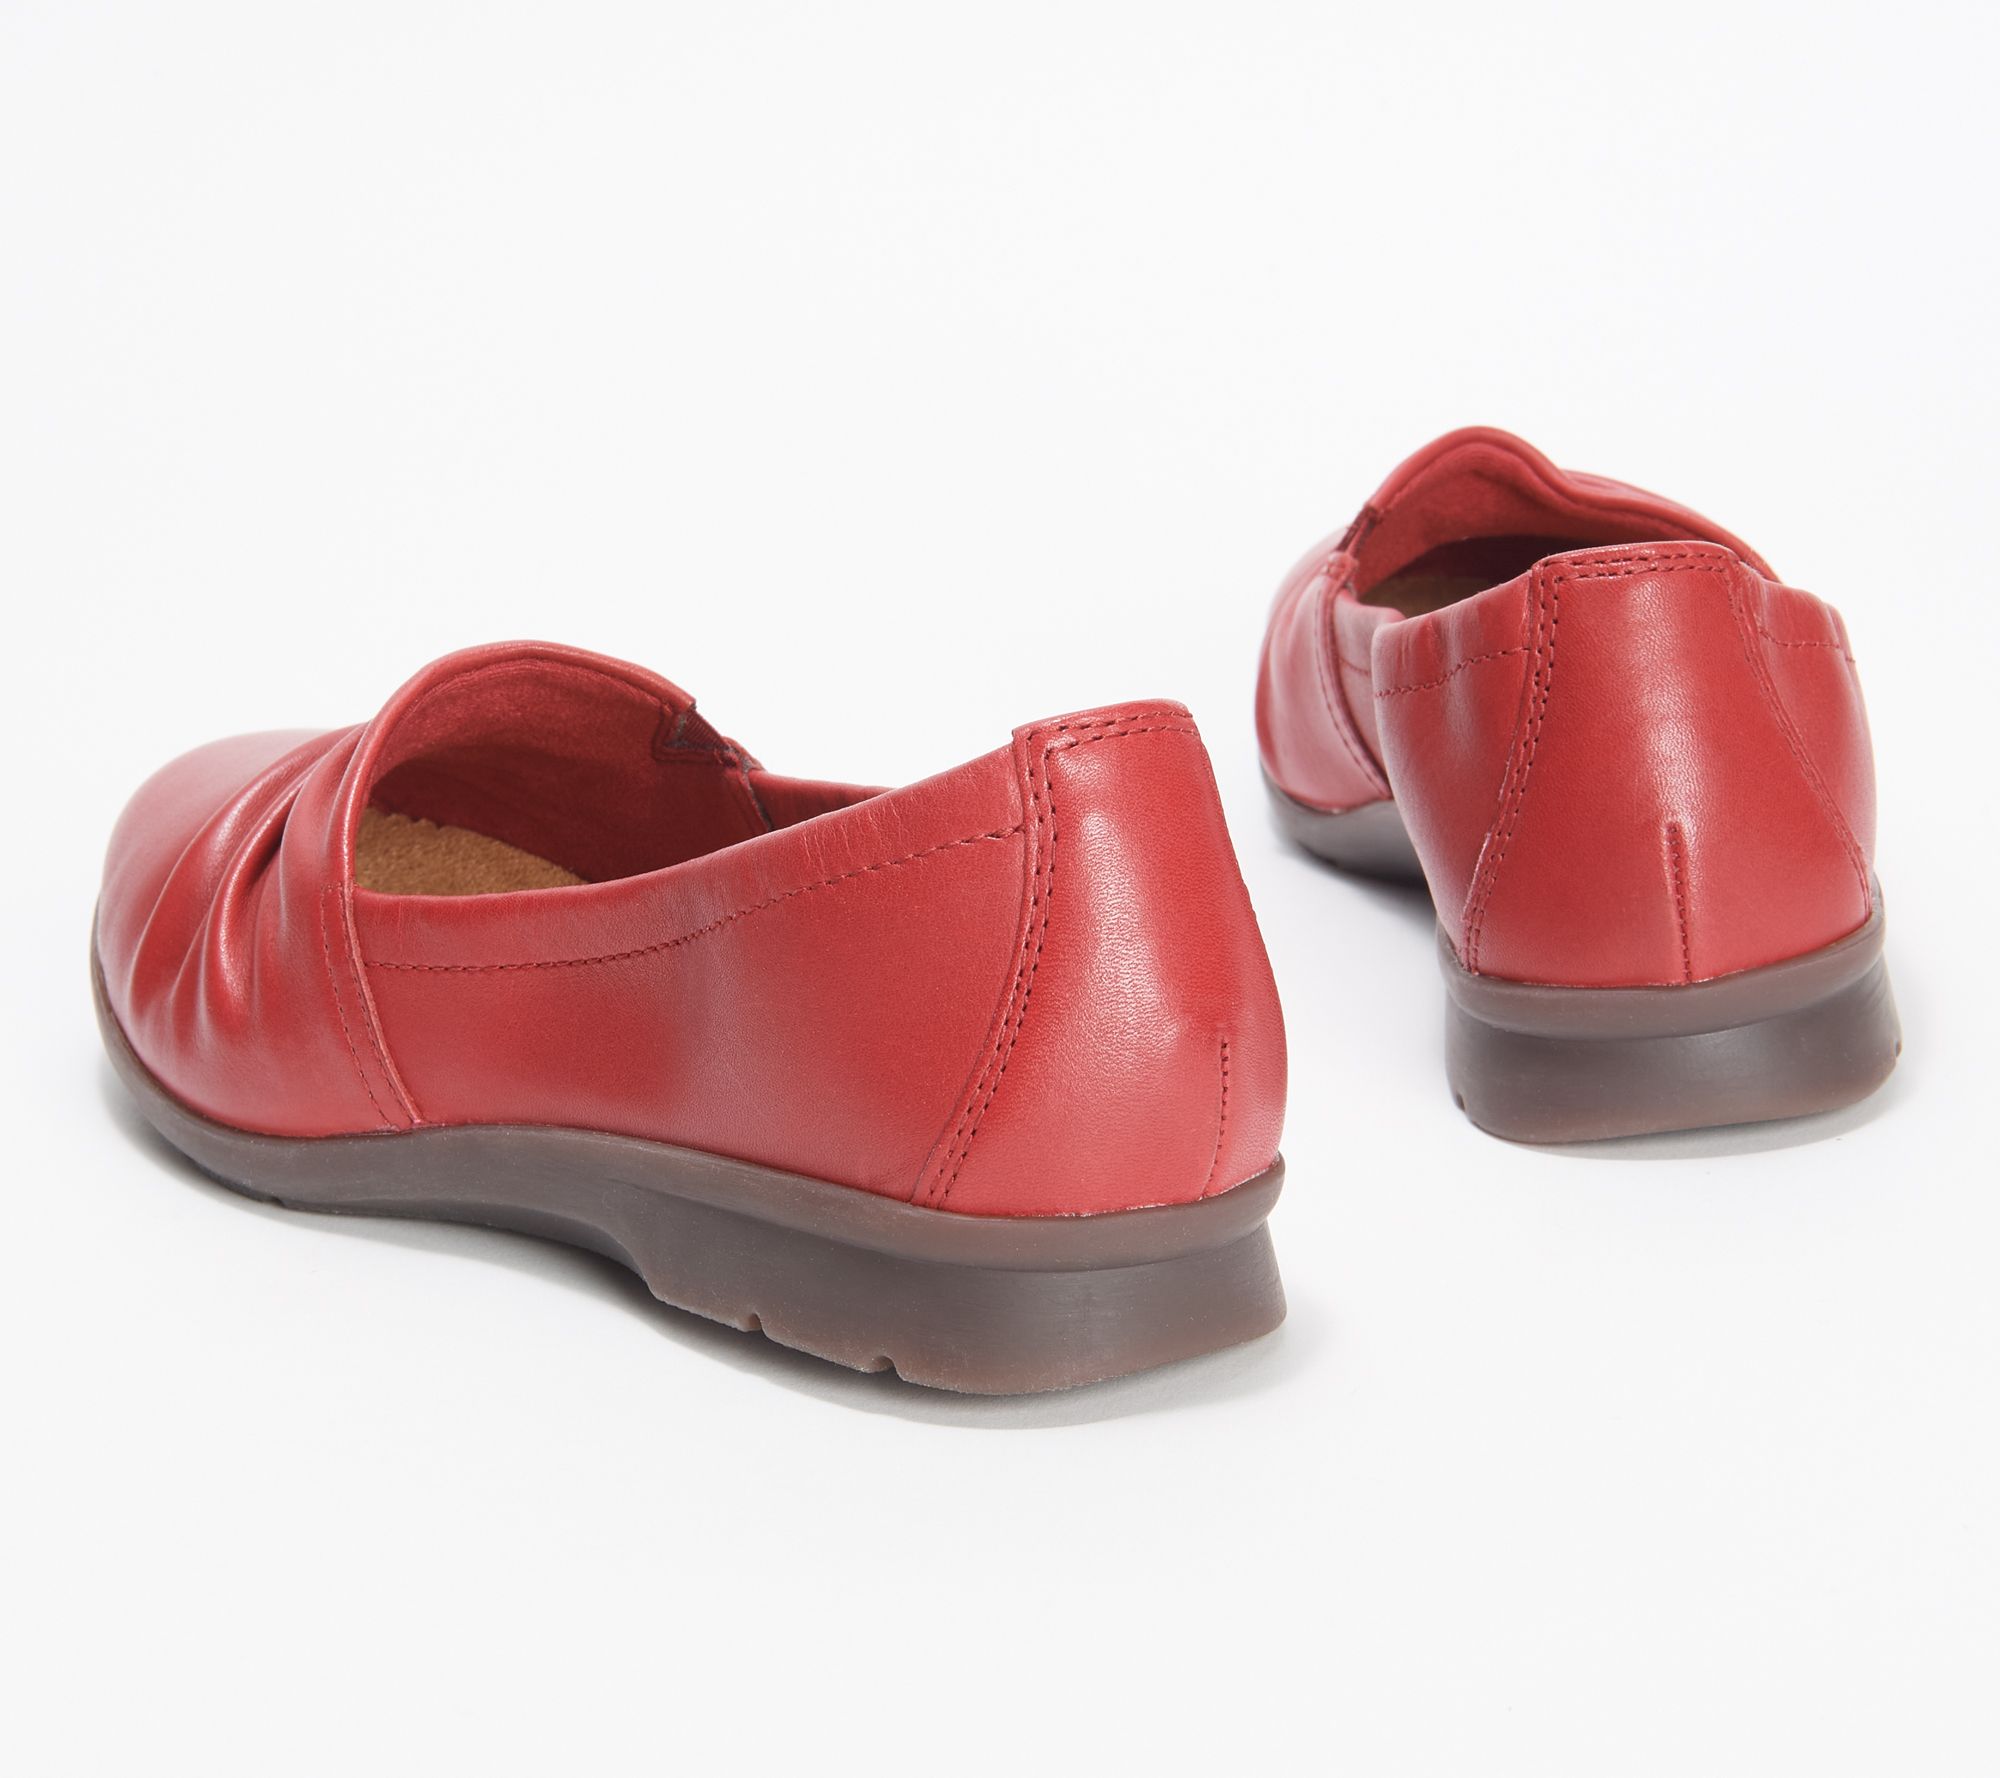 Clarks Collection Rouched Slip-Ons - Jenette Ruby - QVC.com